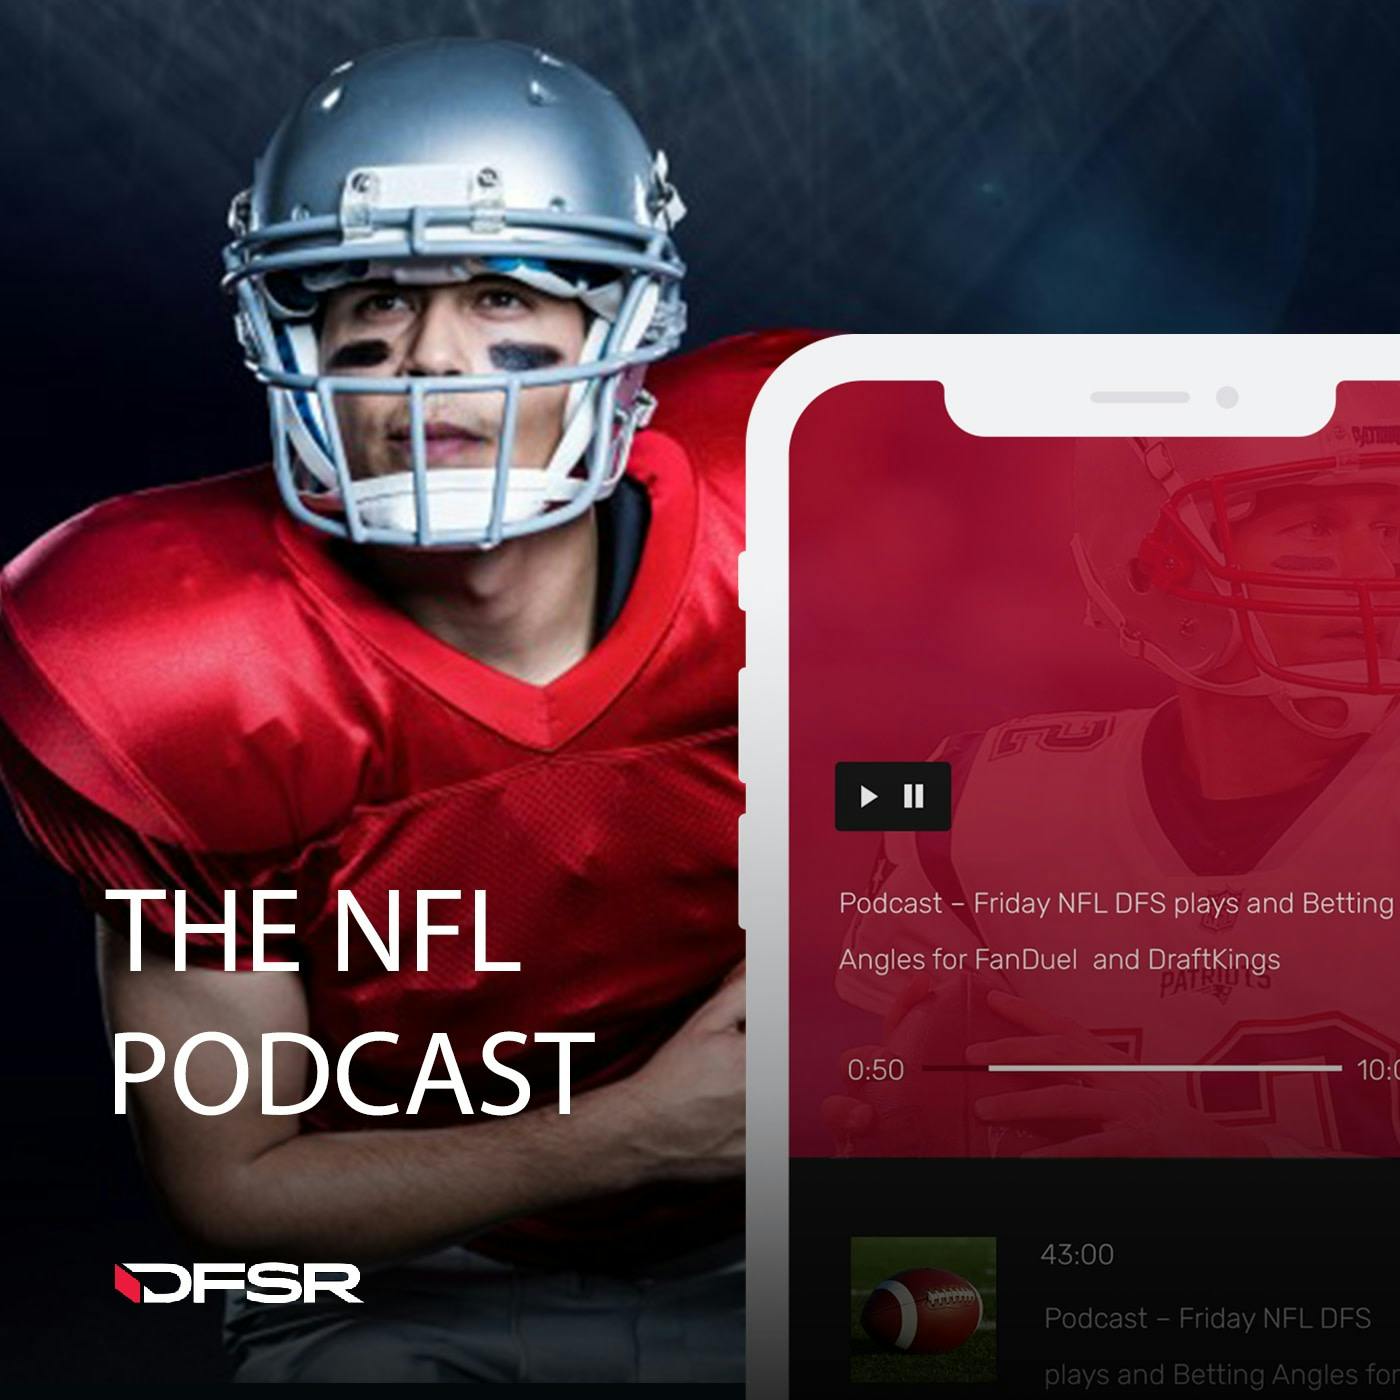 DFS NFL Podcast Week 2 Recap and Week 3 Preview for FanDuel and DraftKings